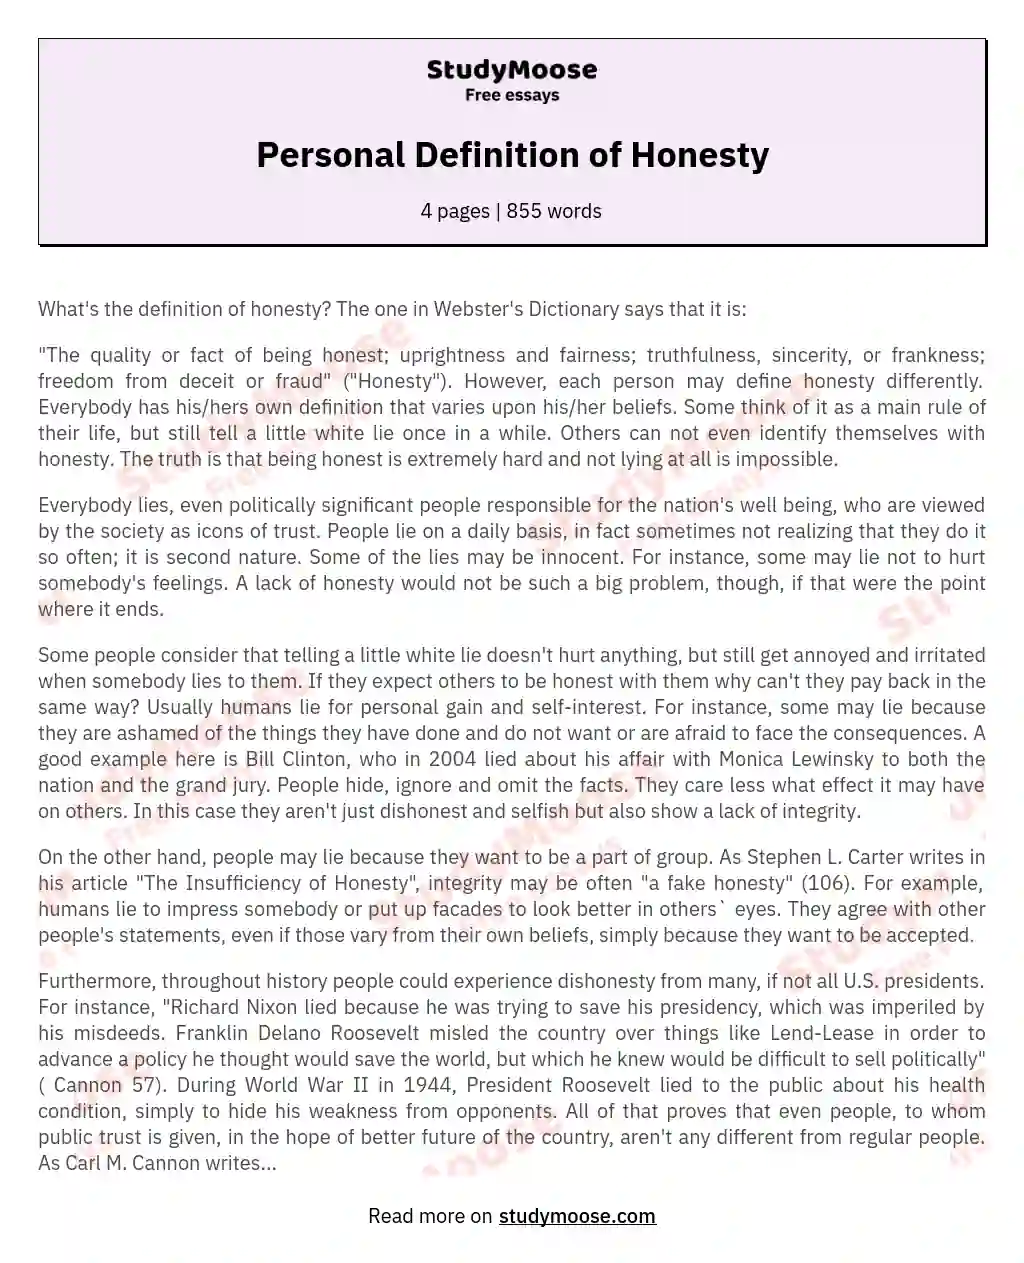 Personal Definition of Honesty